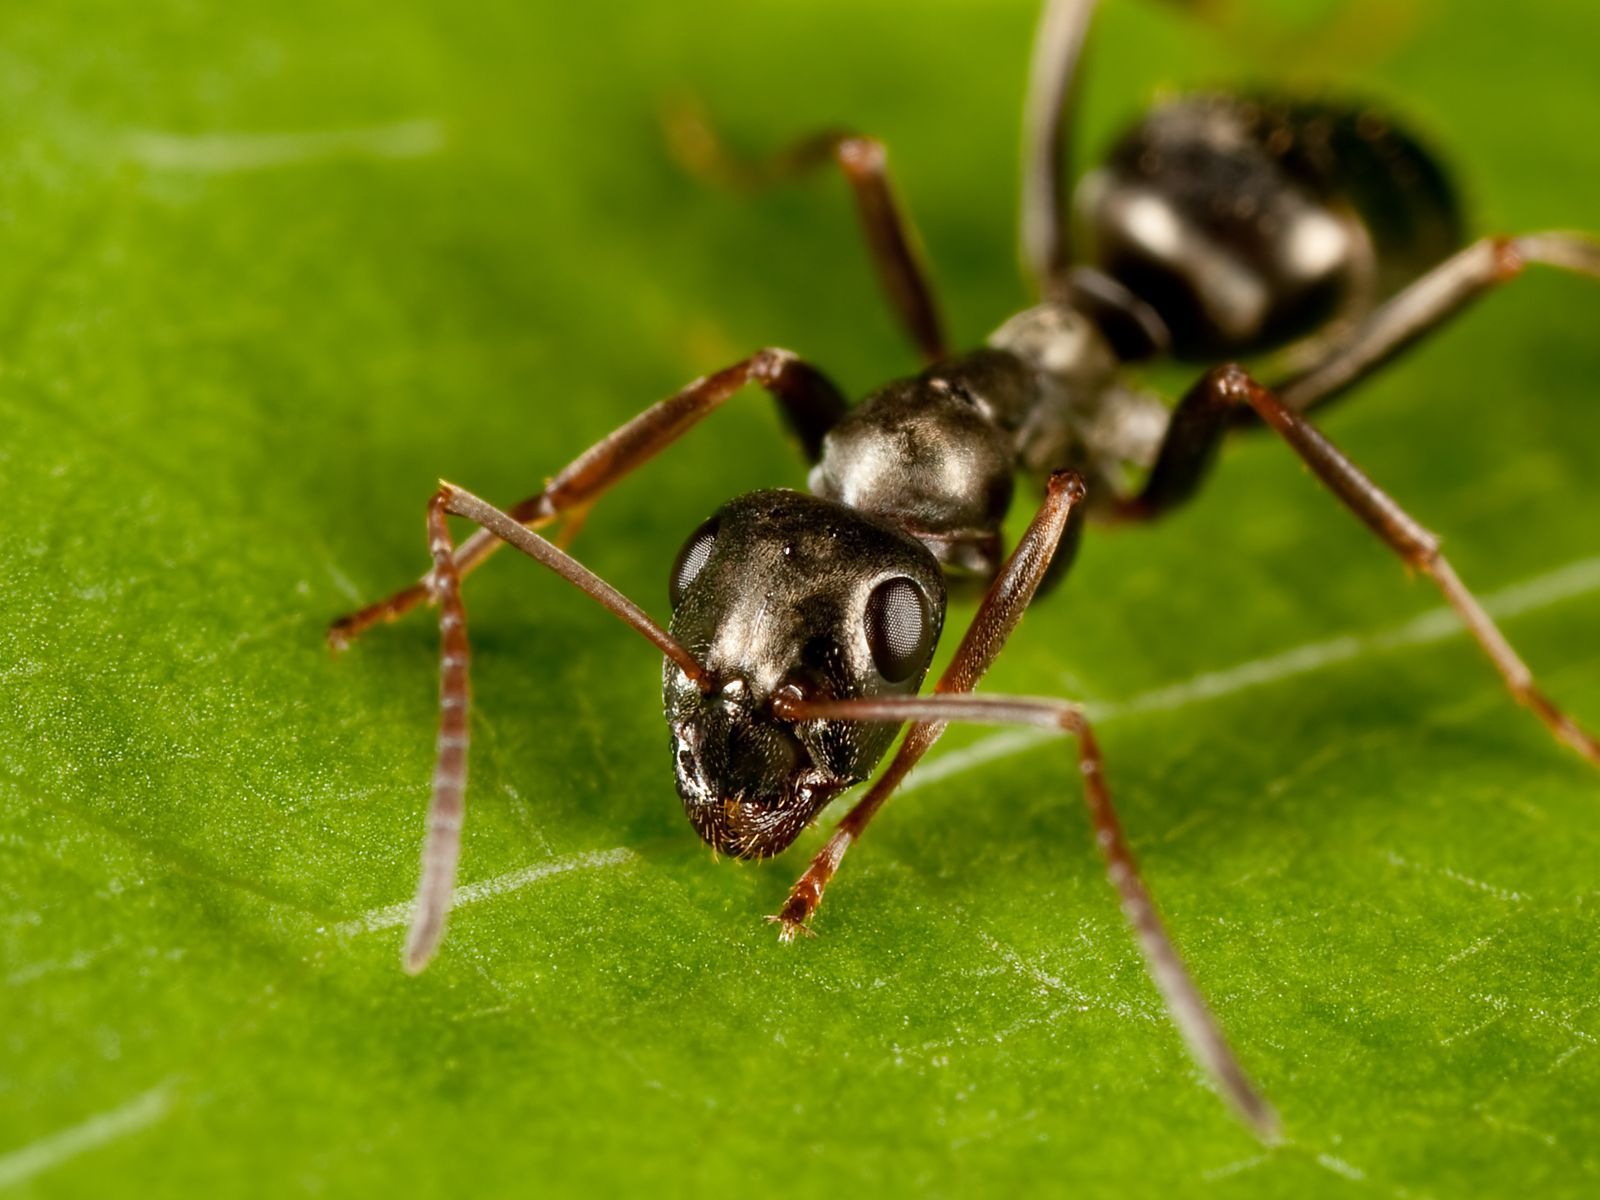 Common Black Ant. Ants, Insect photo, Insects